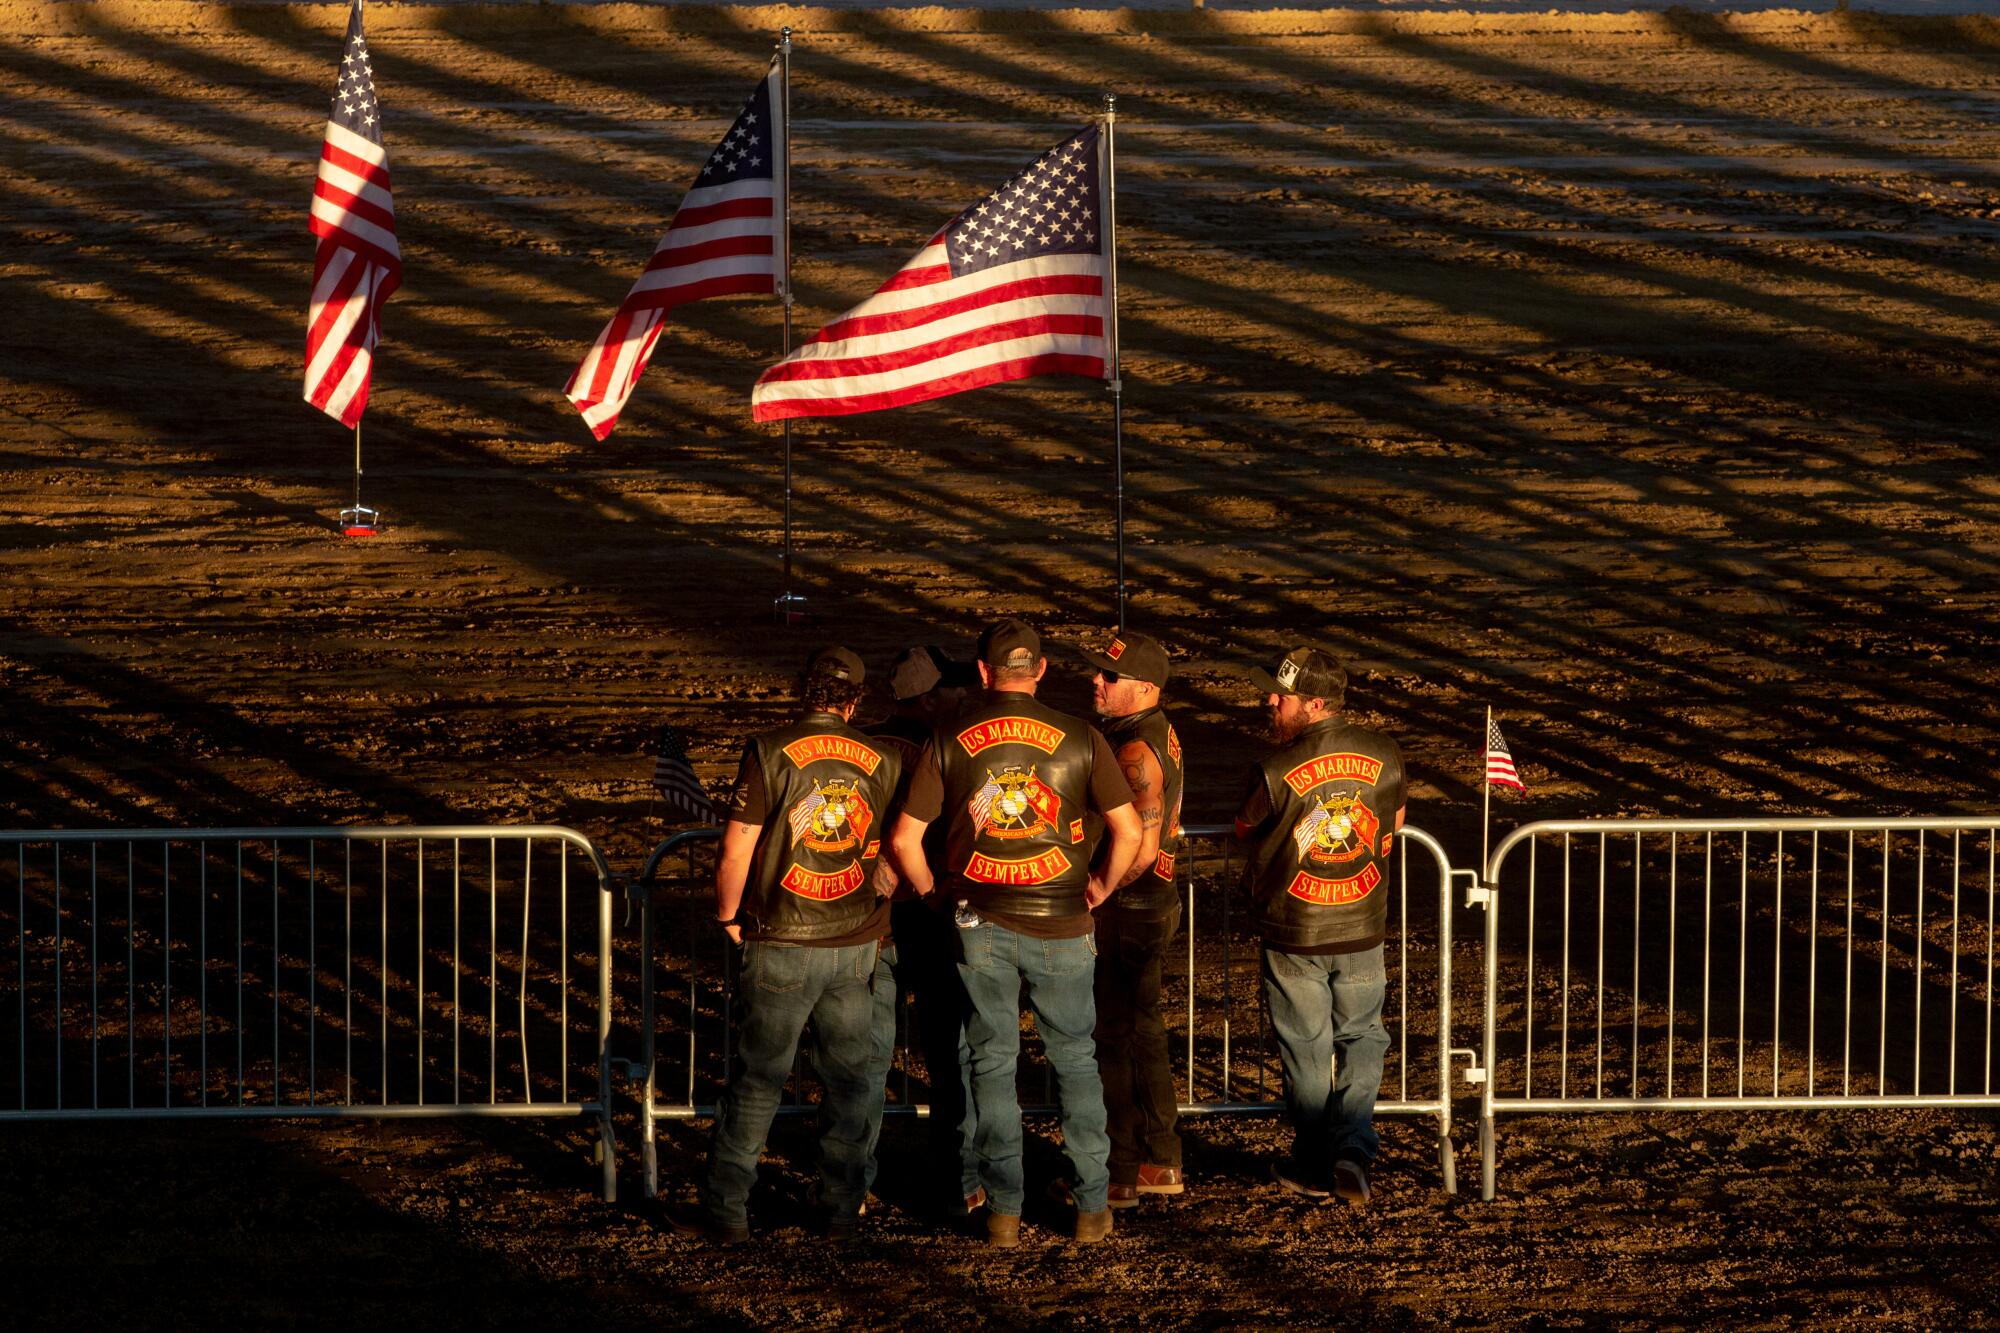 Some men in leather vests stand outside near U.S. flags as the sun sets